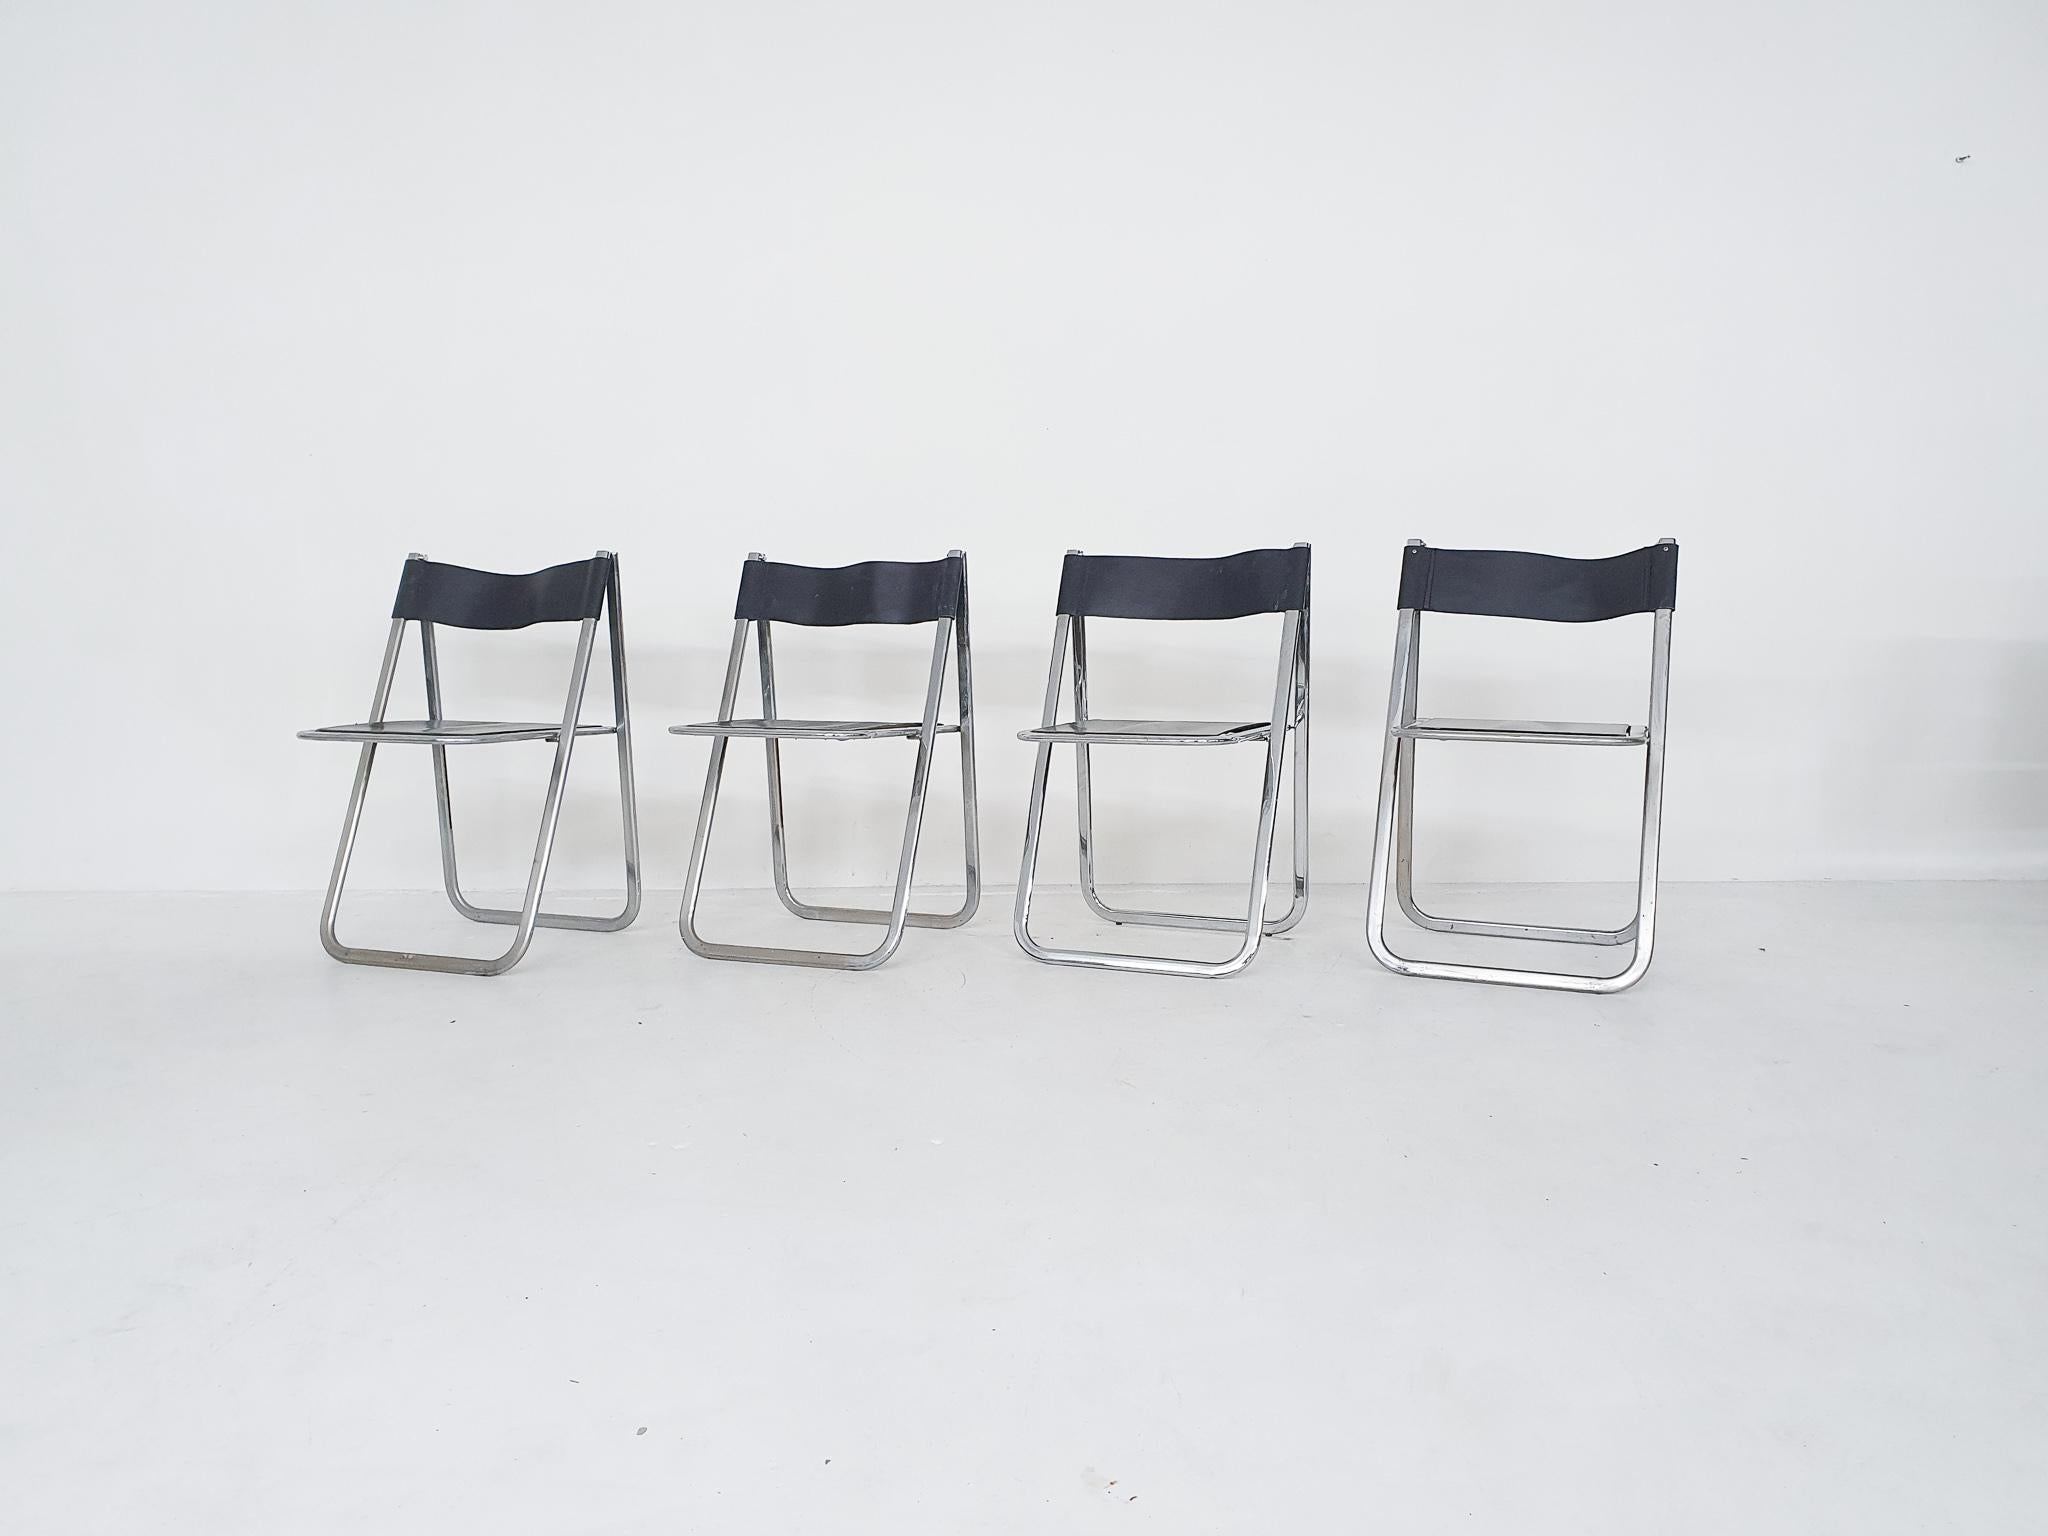 Italian Set of Four Chrome and Leather “Tamara” Folding Chairs by Arrben, Italy, 1970s